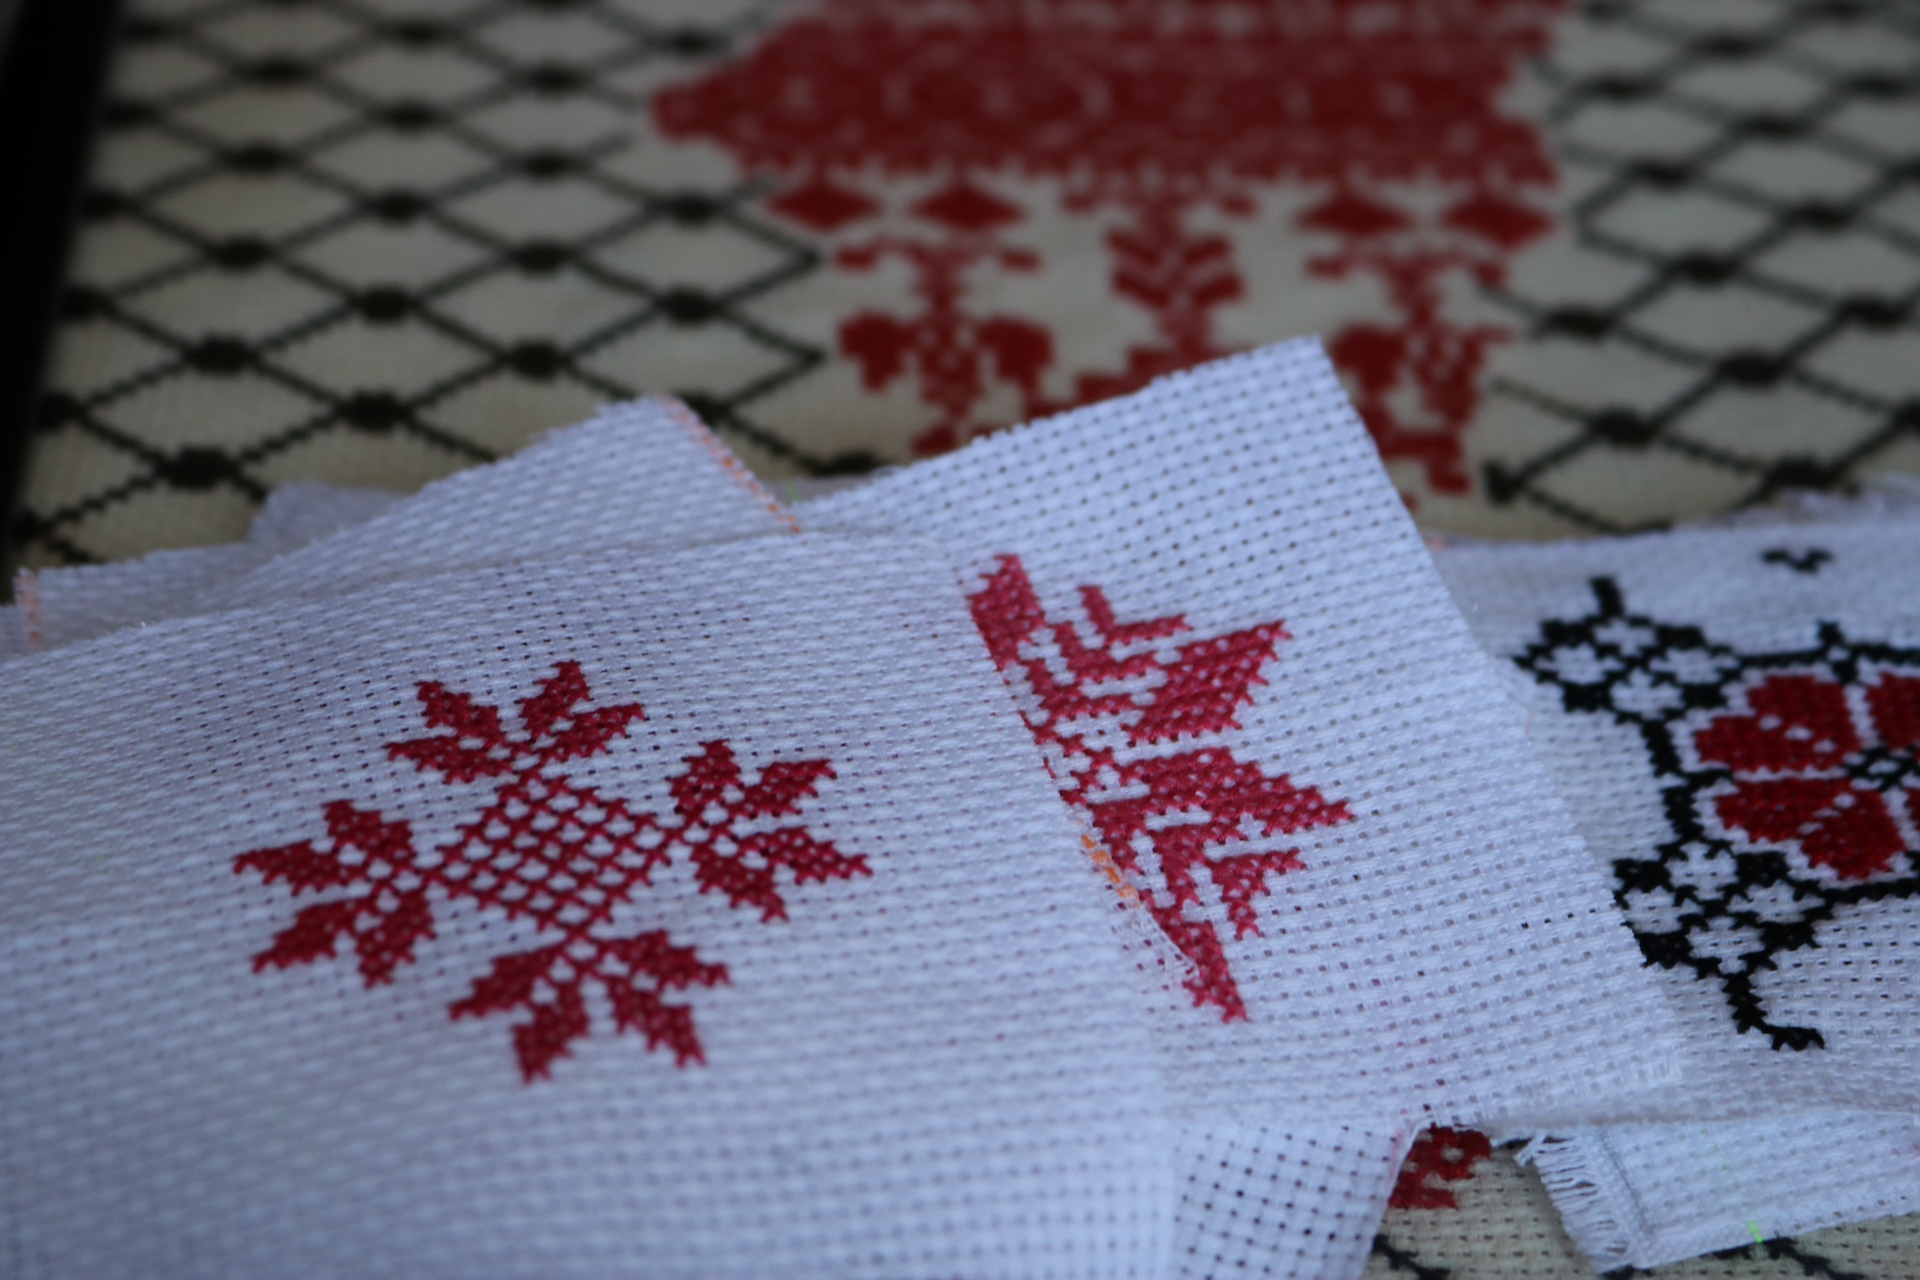 Several embroidered patterns